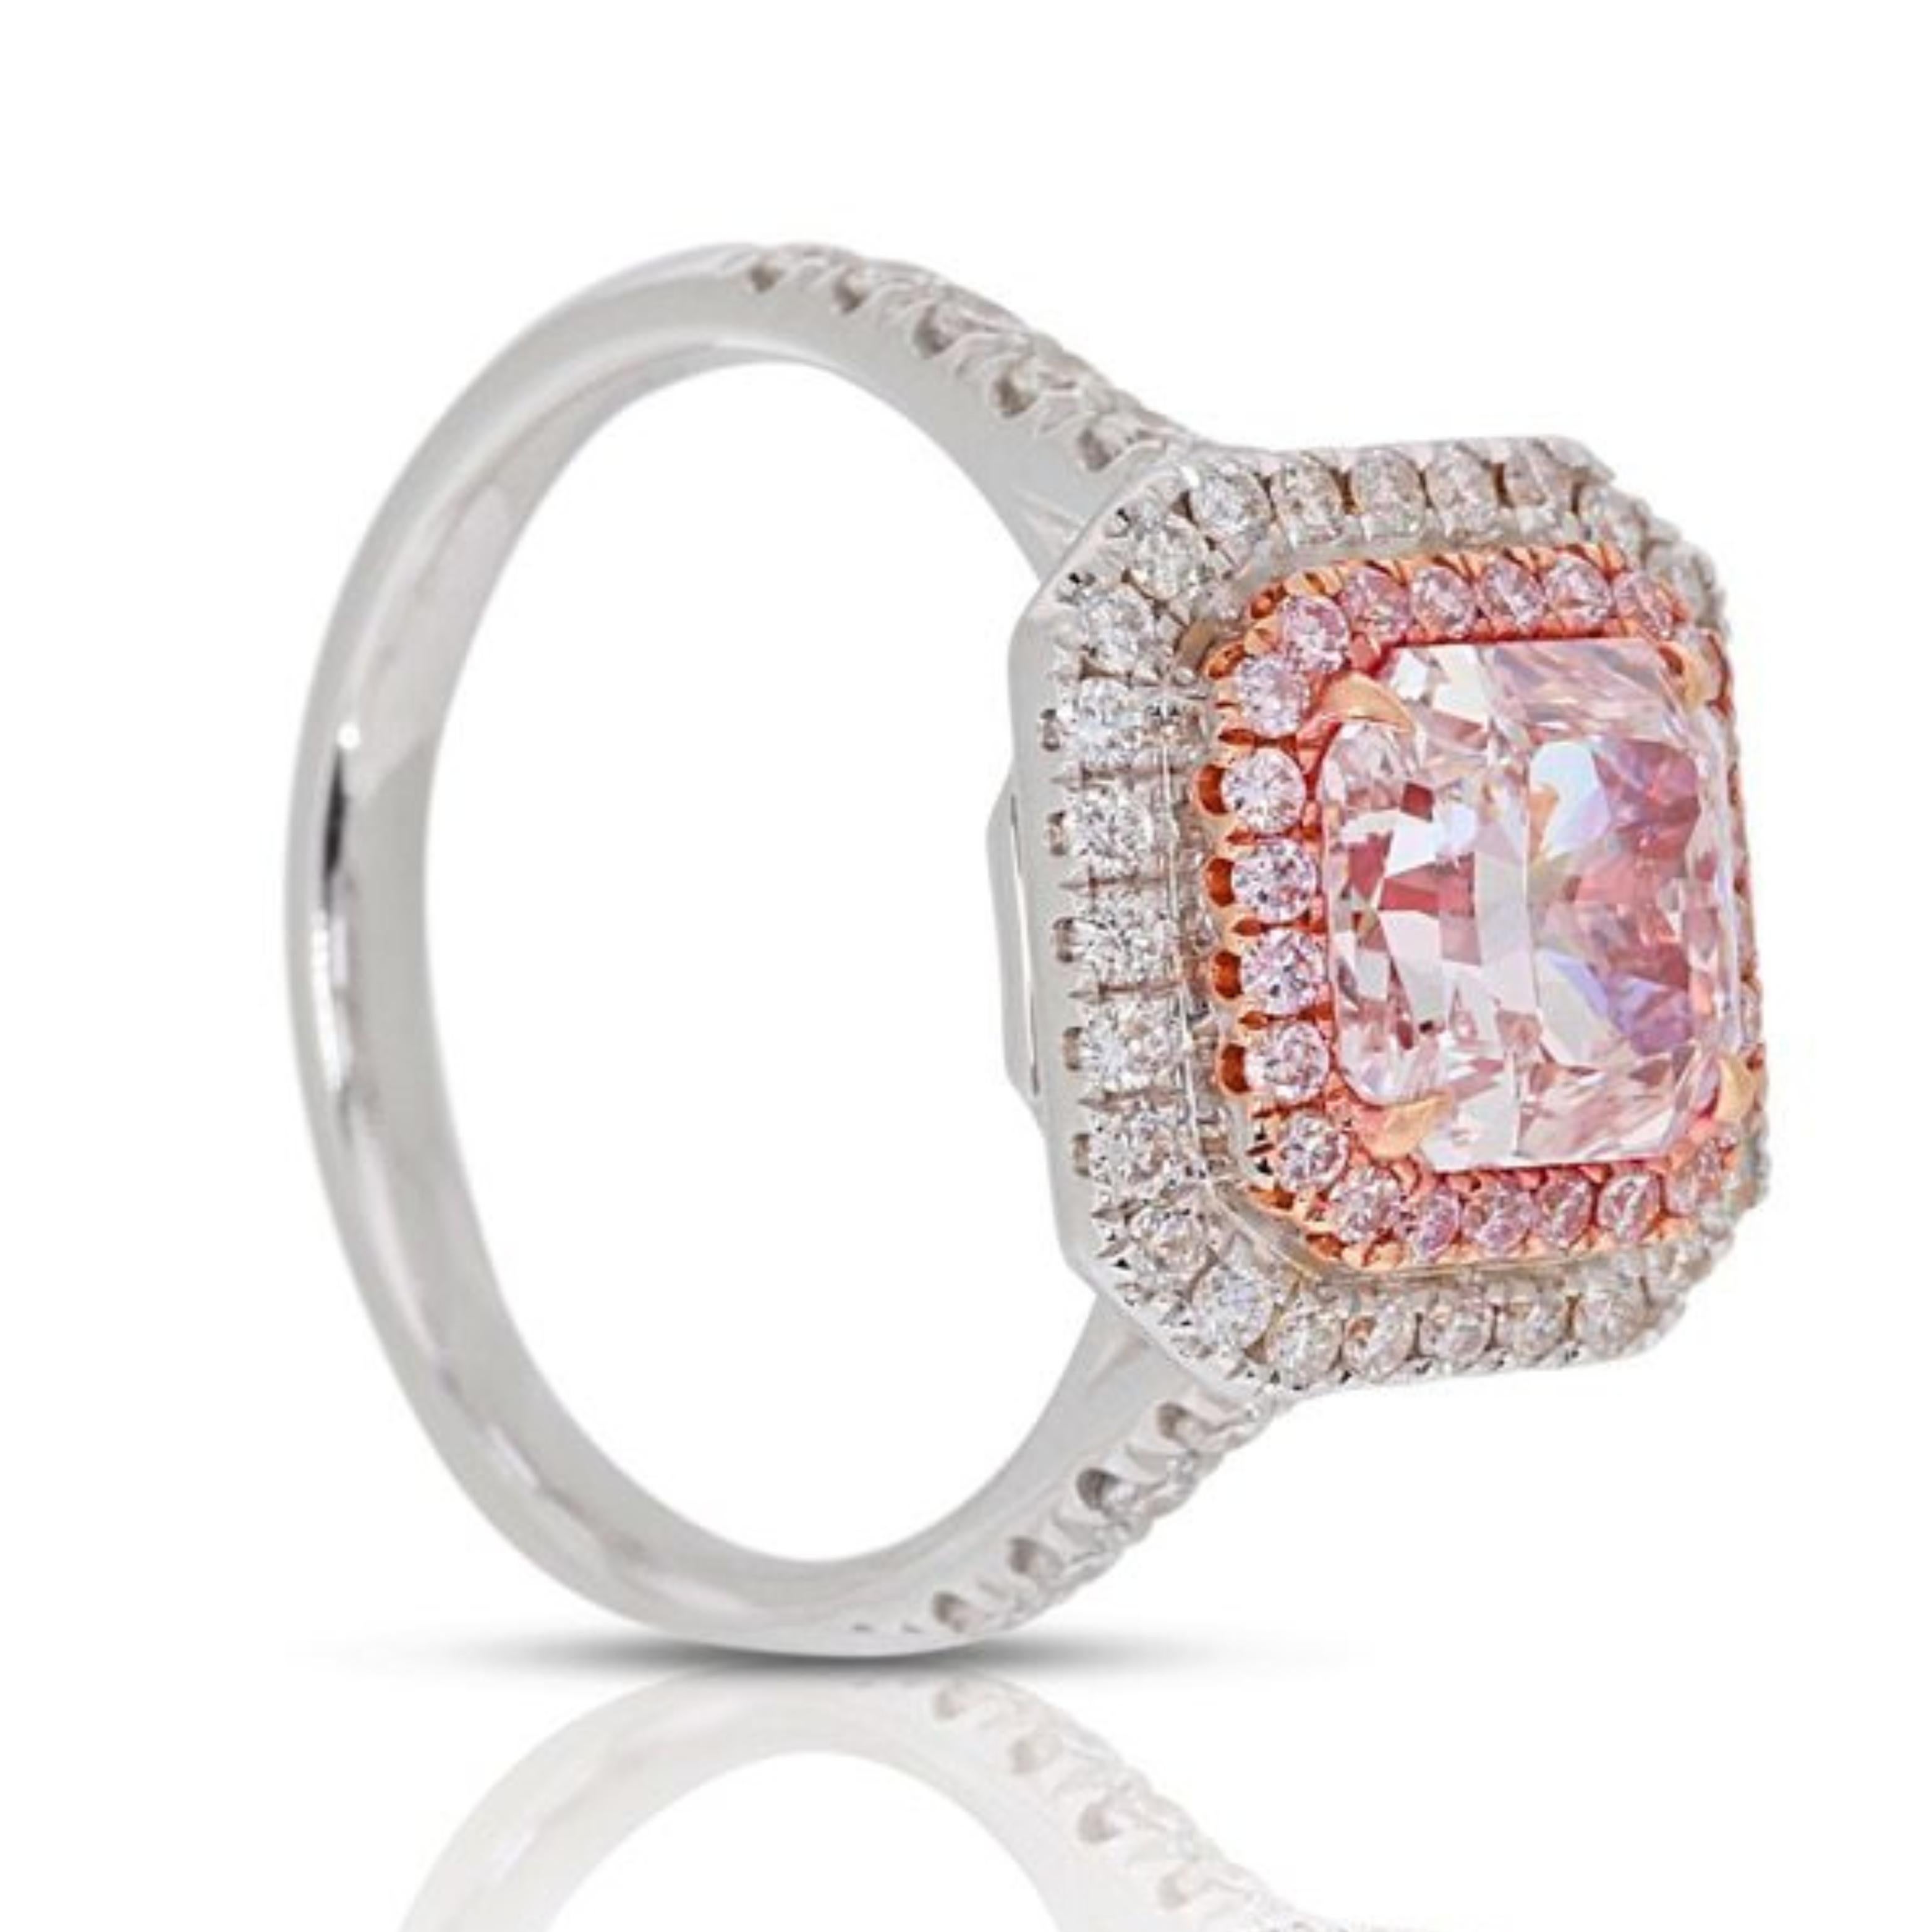 Women's Captivating 1.86ct. Square Radiant Halo Diamond Ring For Sale